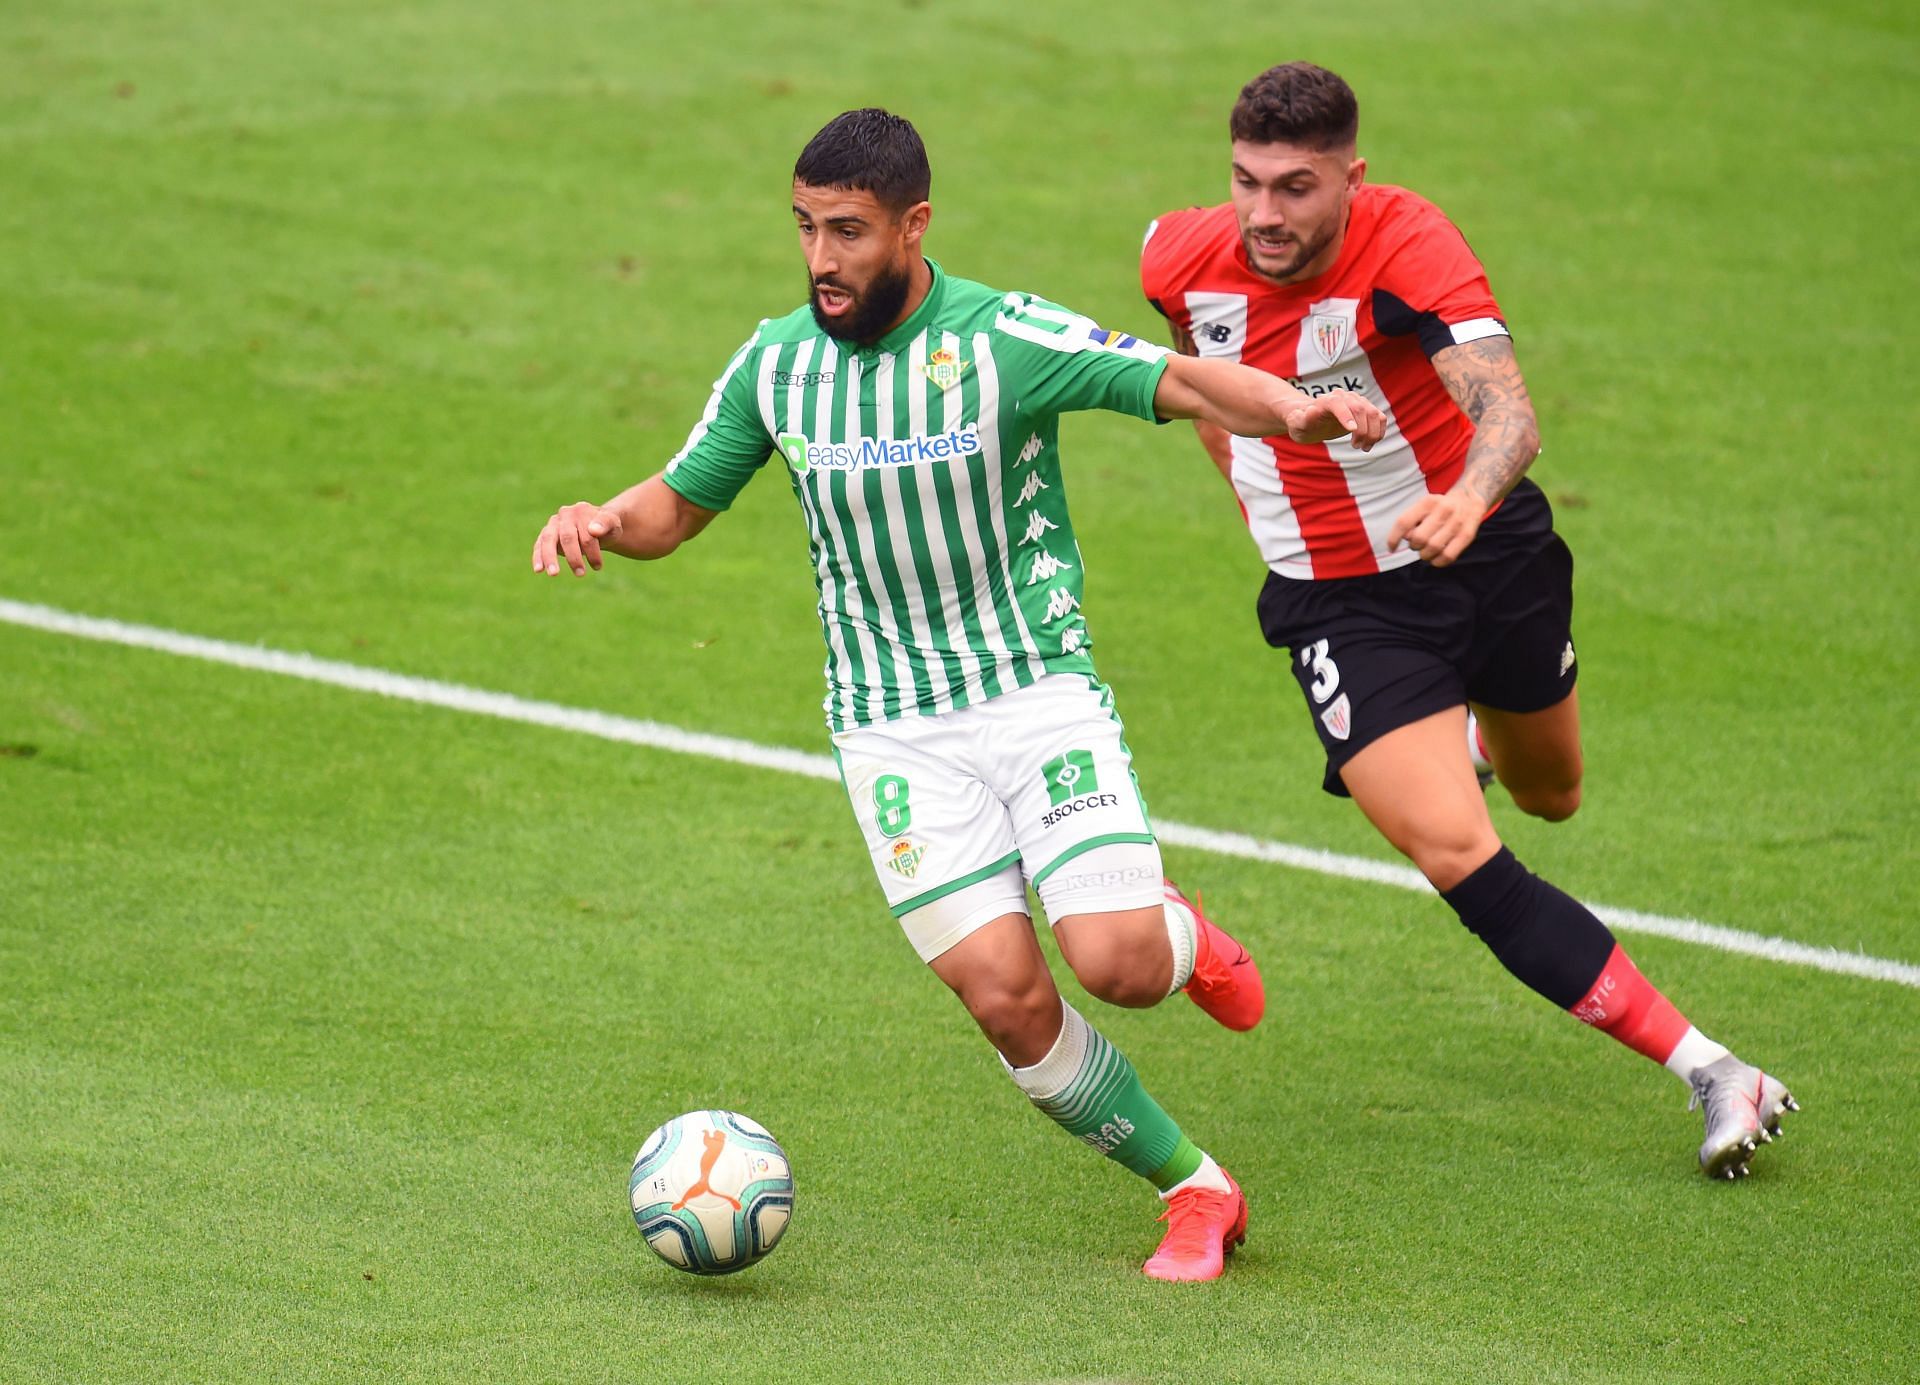 Real Betis host Athletic Bilbao in their upcoming La Liga fixture on Sunday